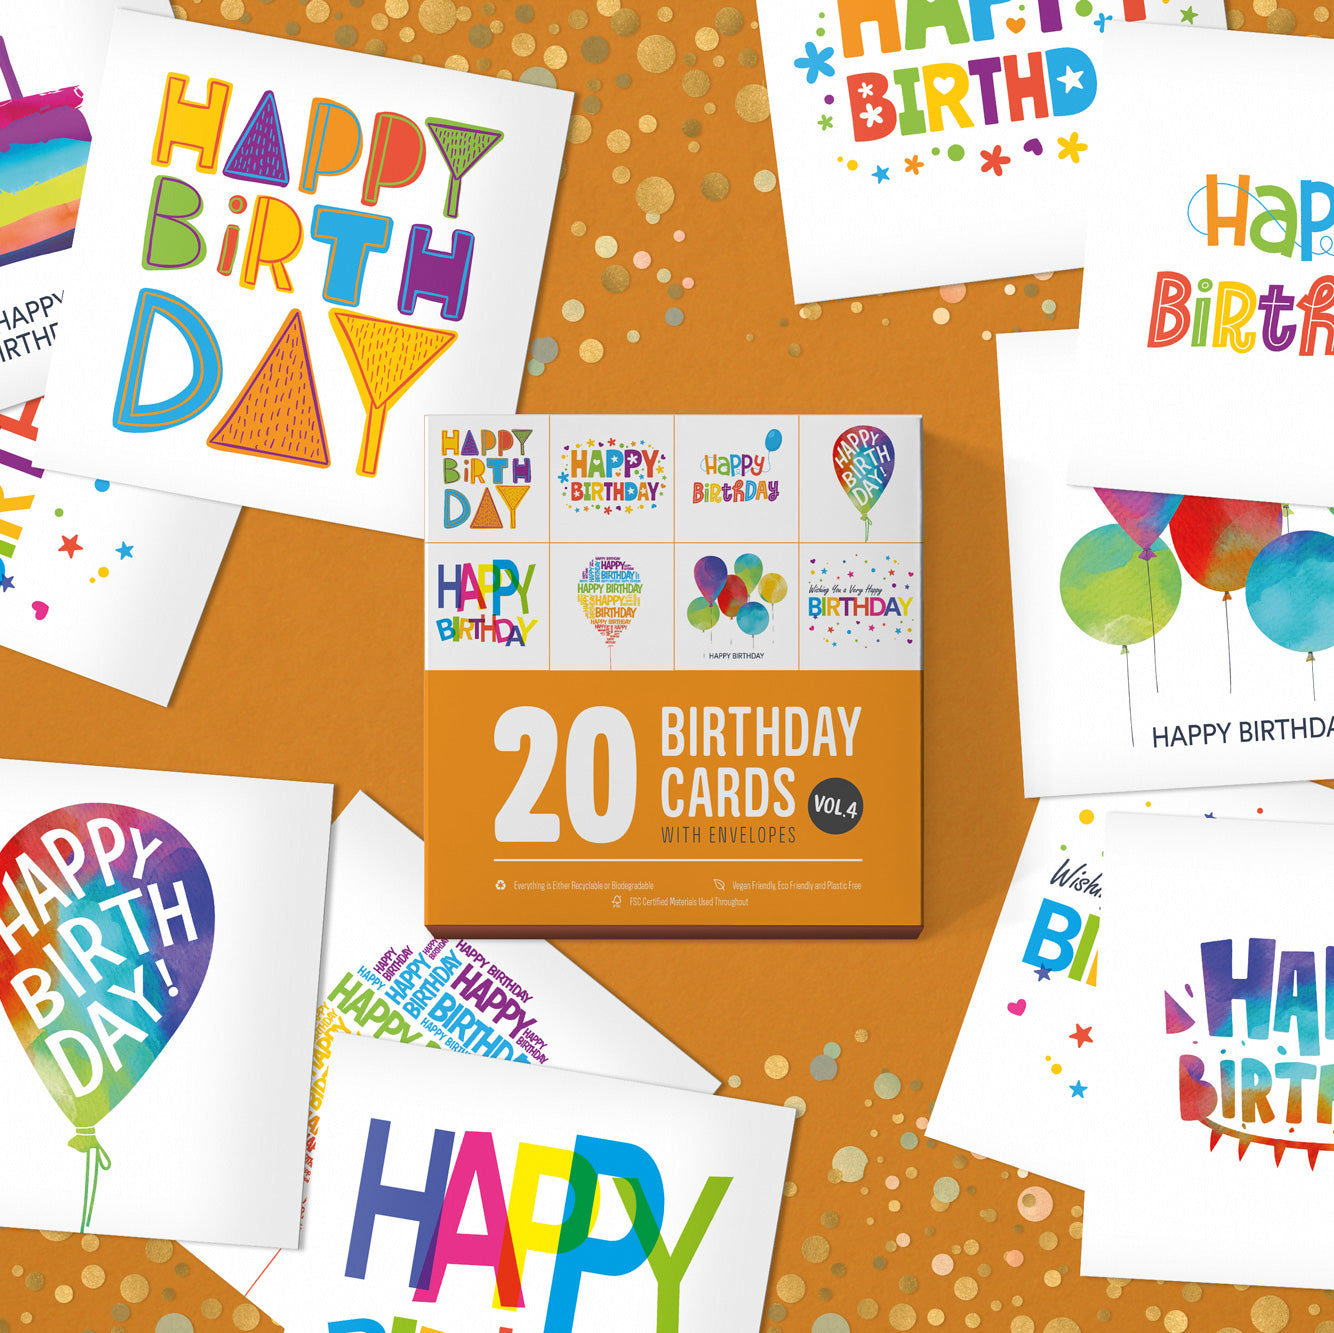 Pack of Birthday Cards | 20 Cards + 20 Envelopes | Suitable for all Volume 4